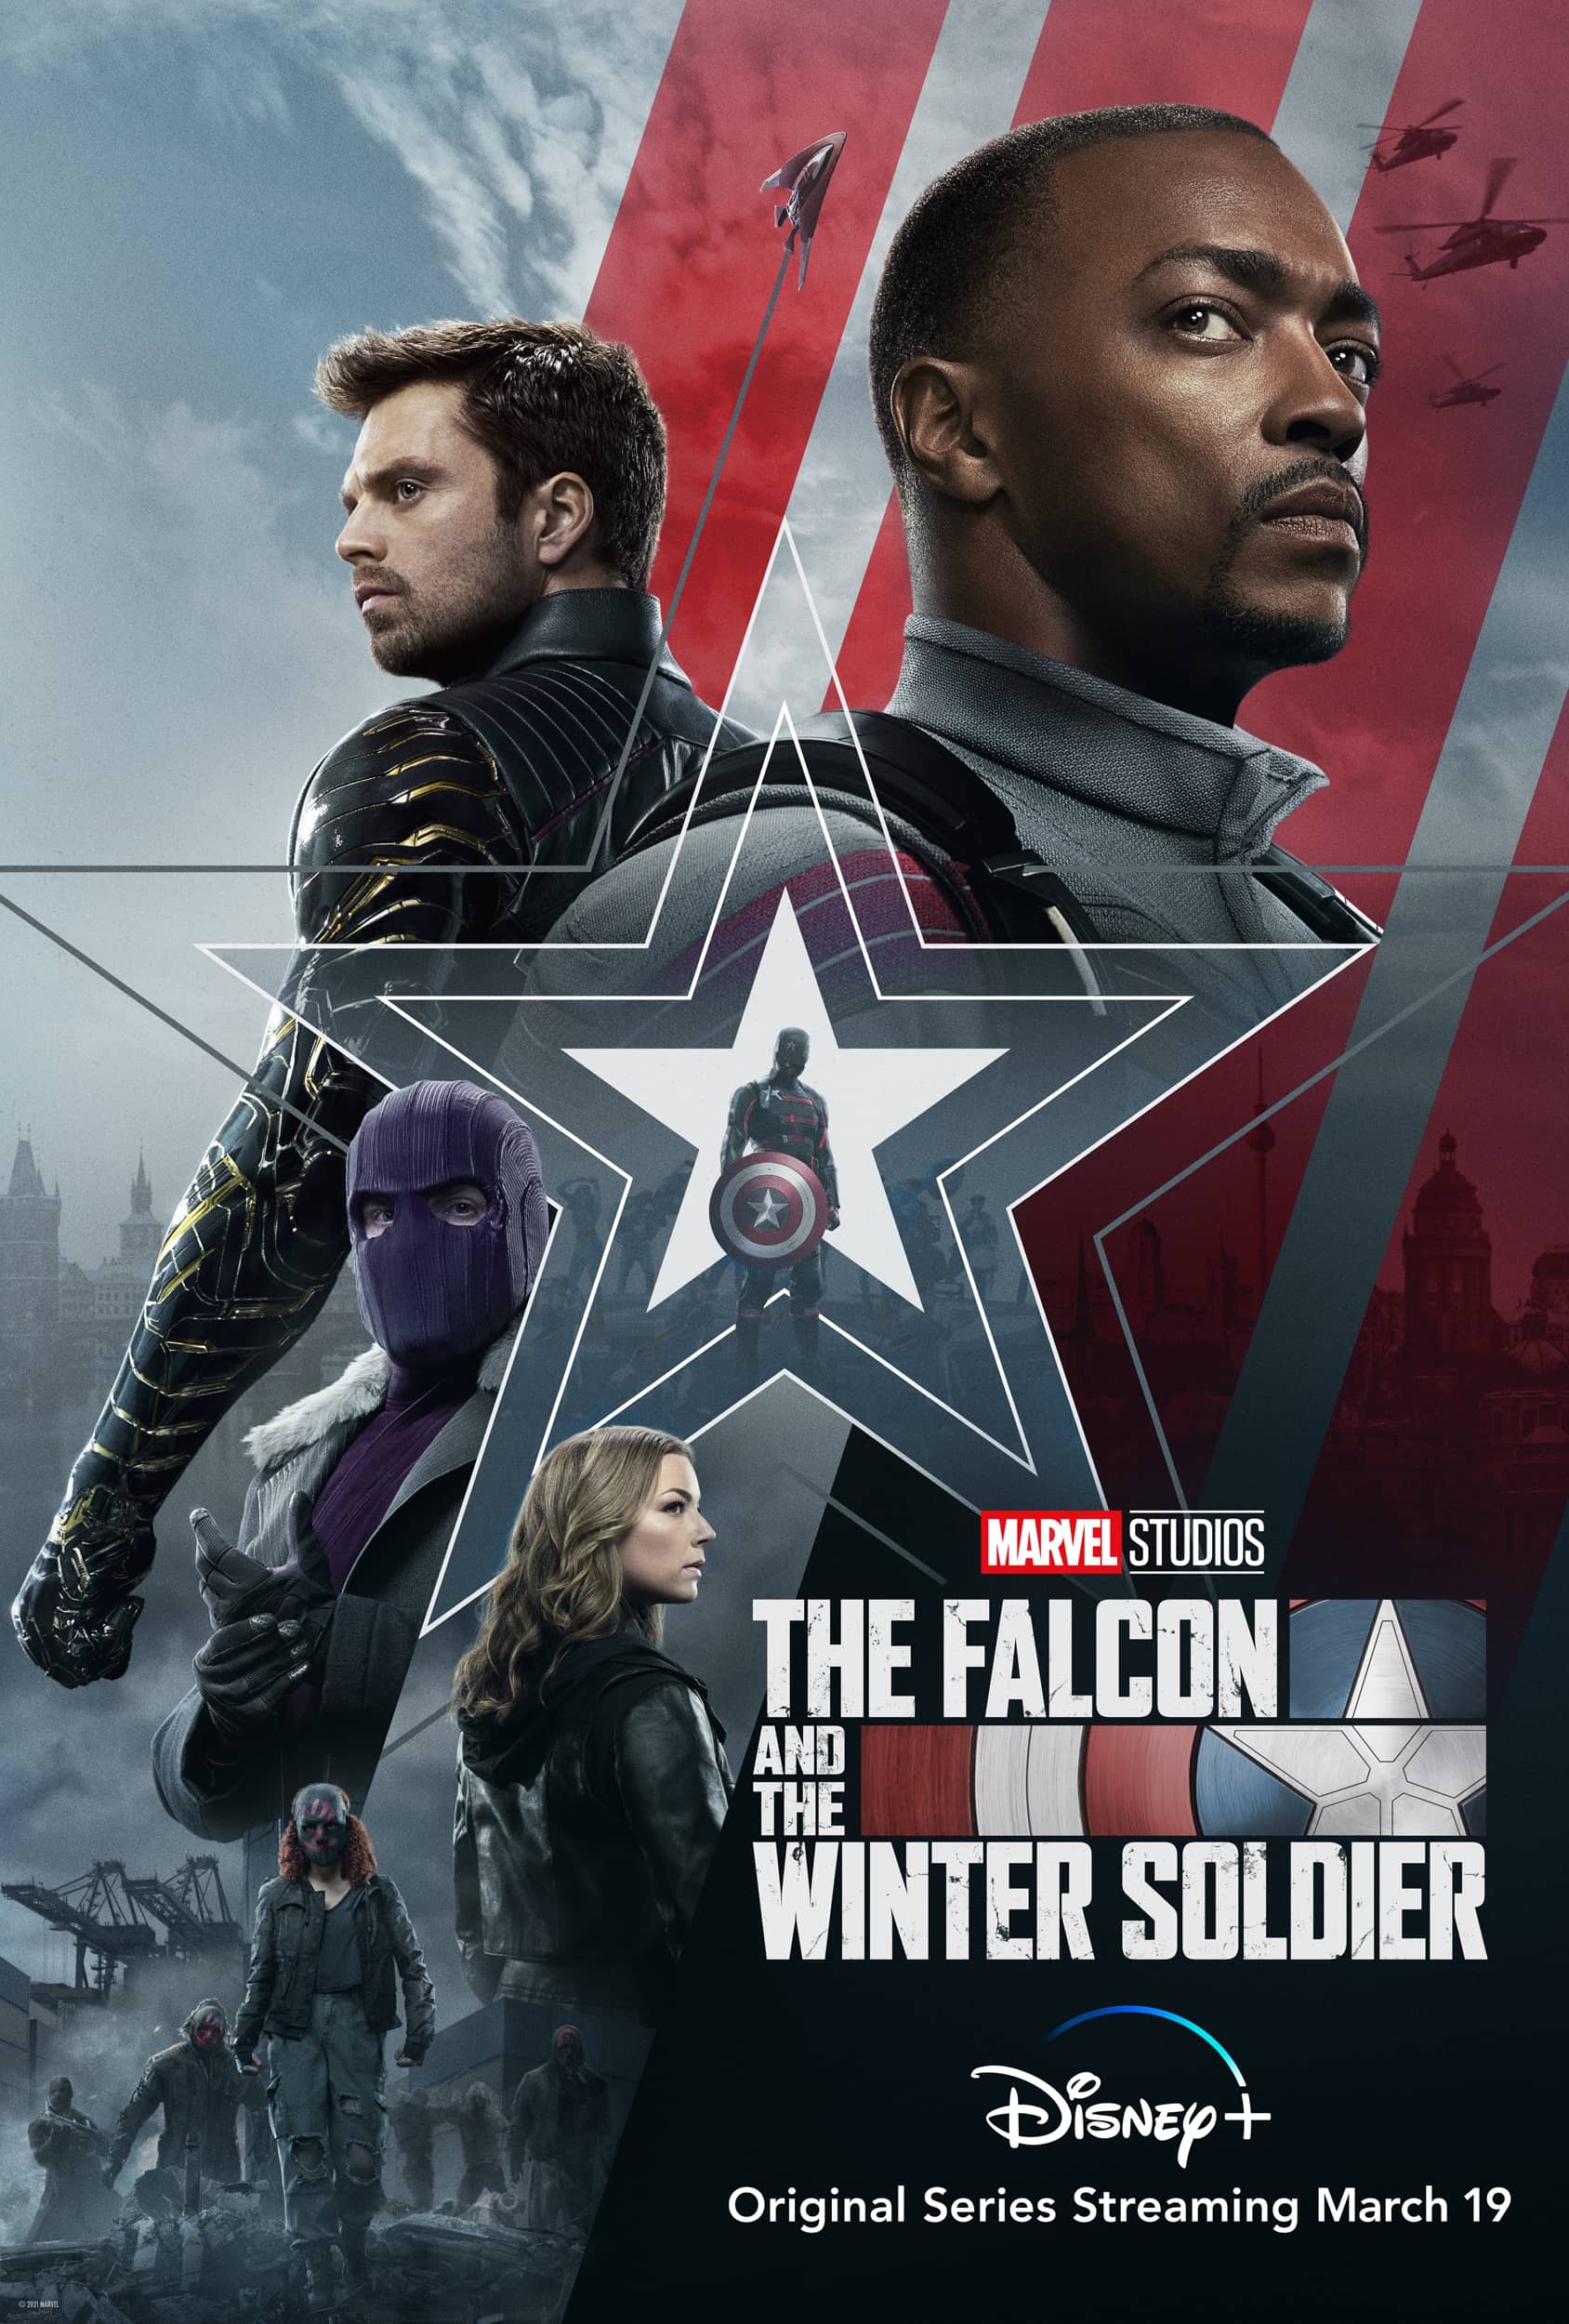 Falcon and the winter soldier poster